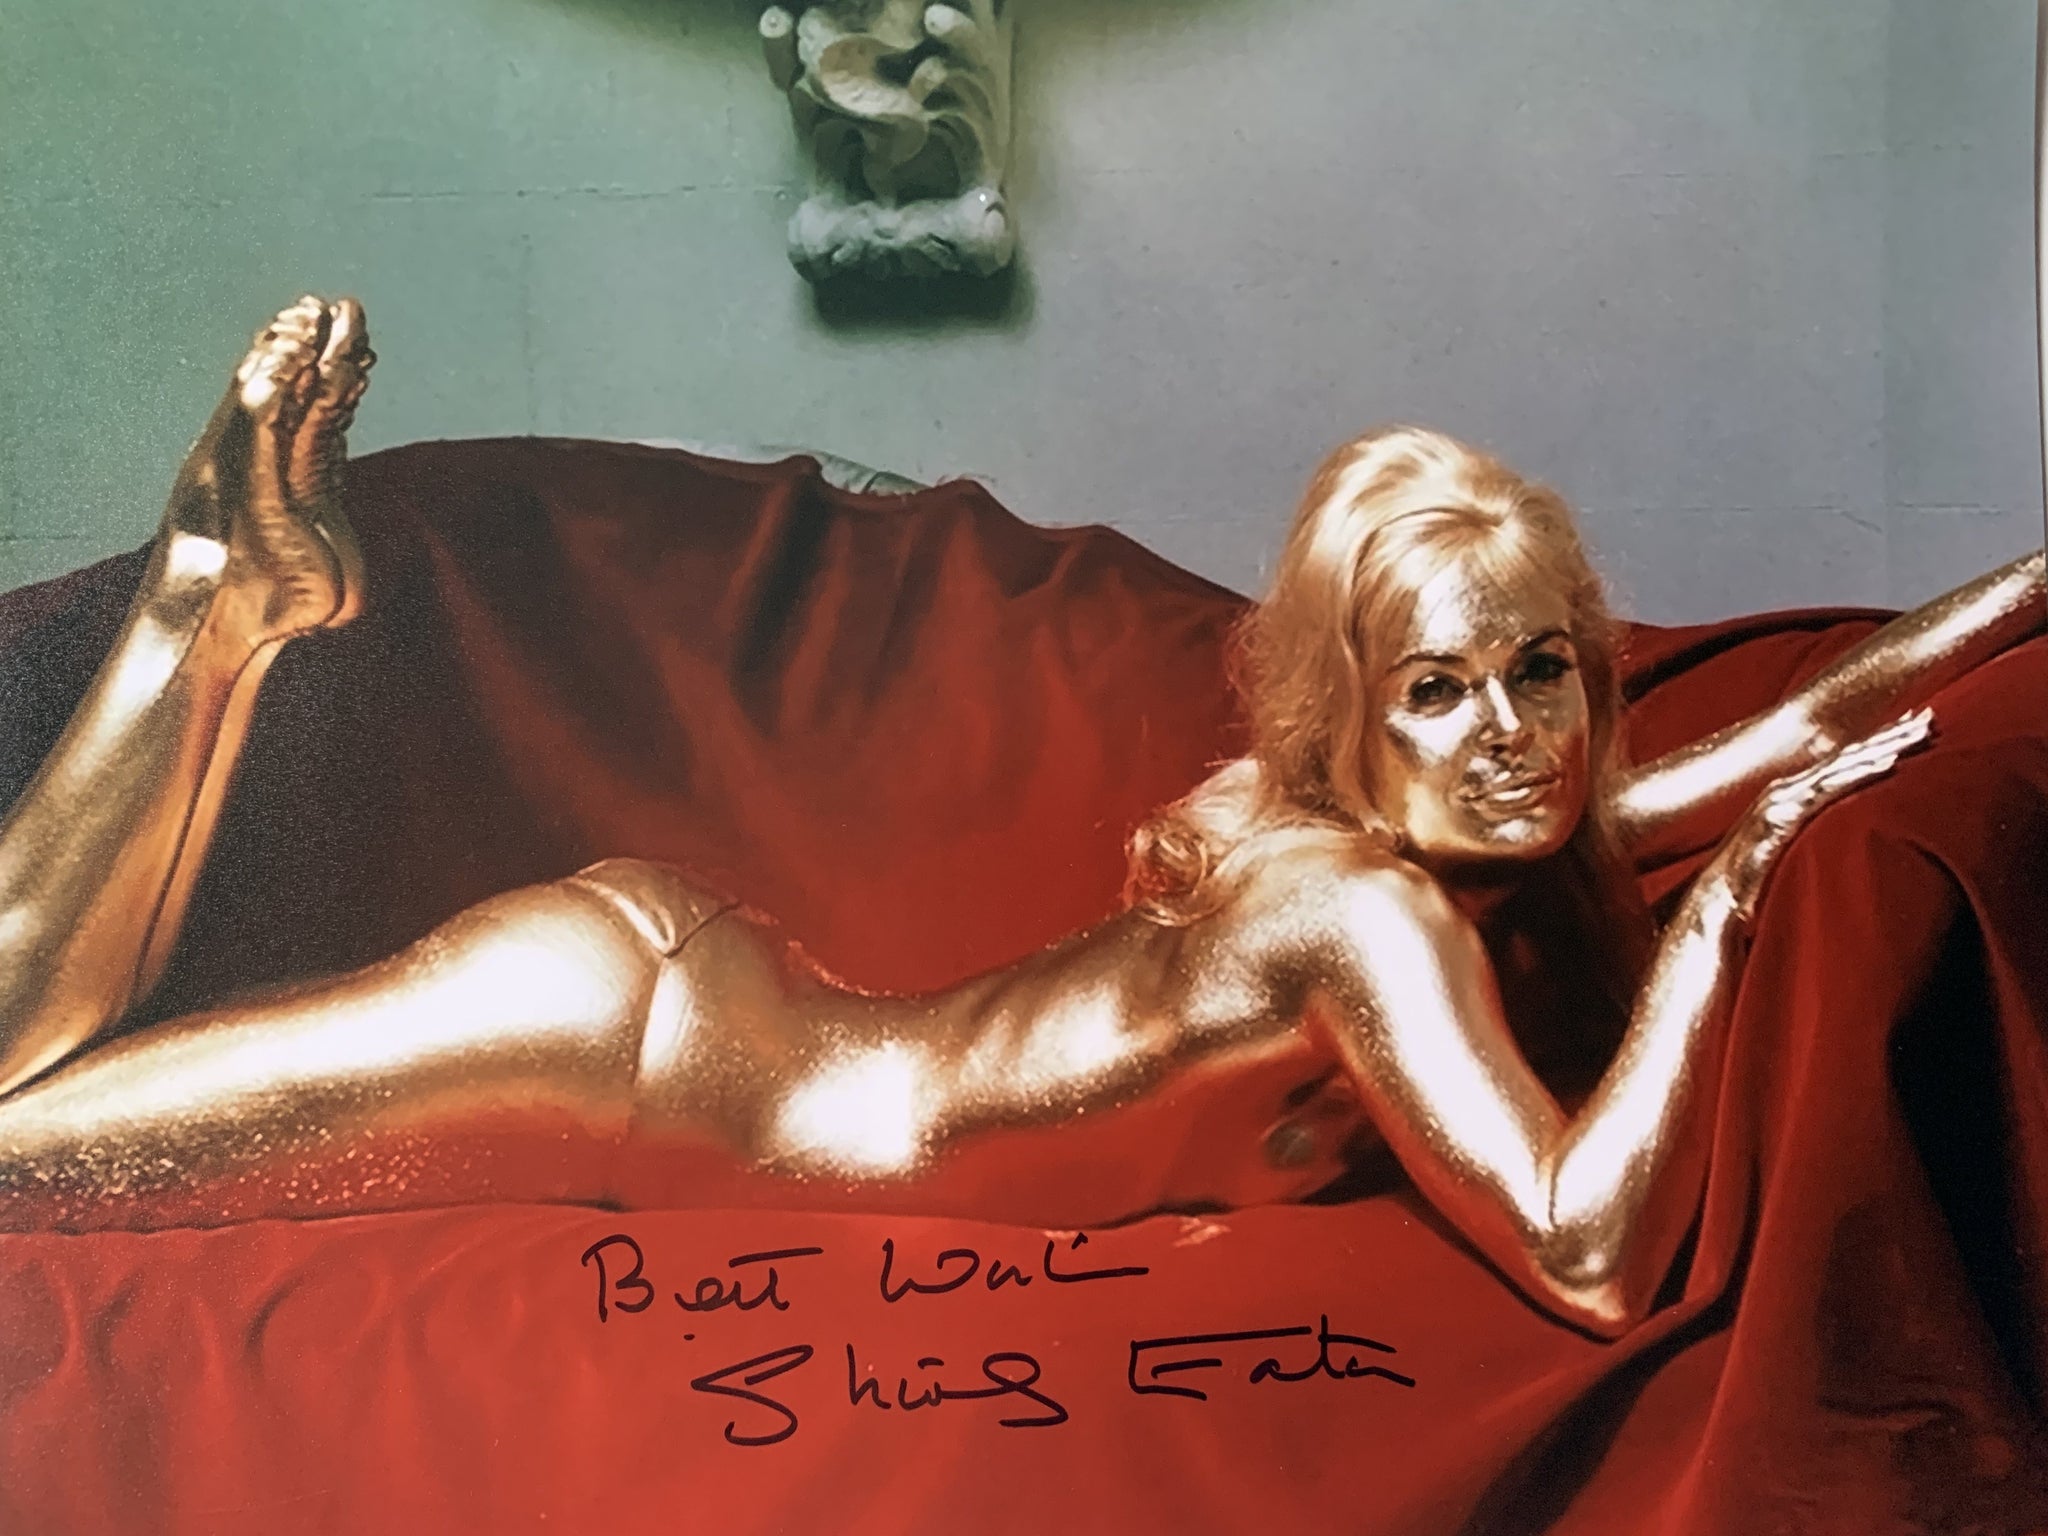 SHIRLEY EATON - Jill Masterson in Goldfinger - 11 x 14 James Bond hand signed